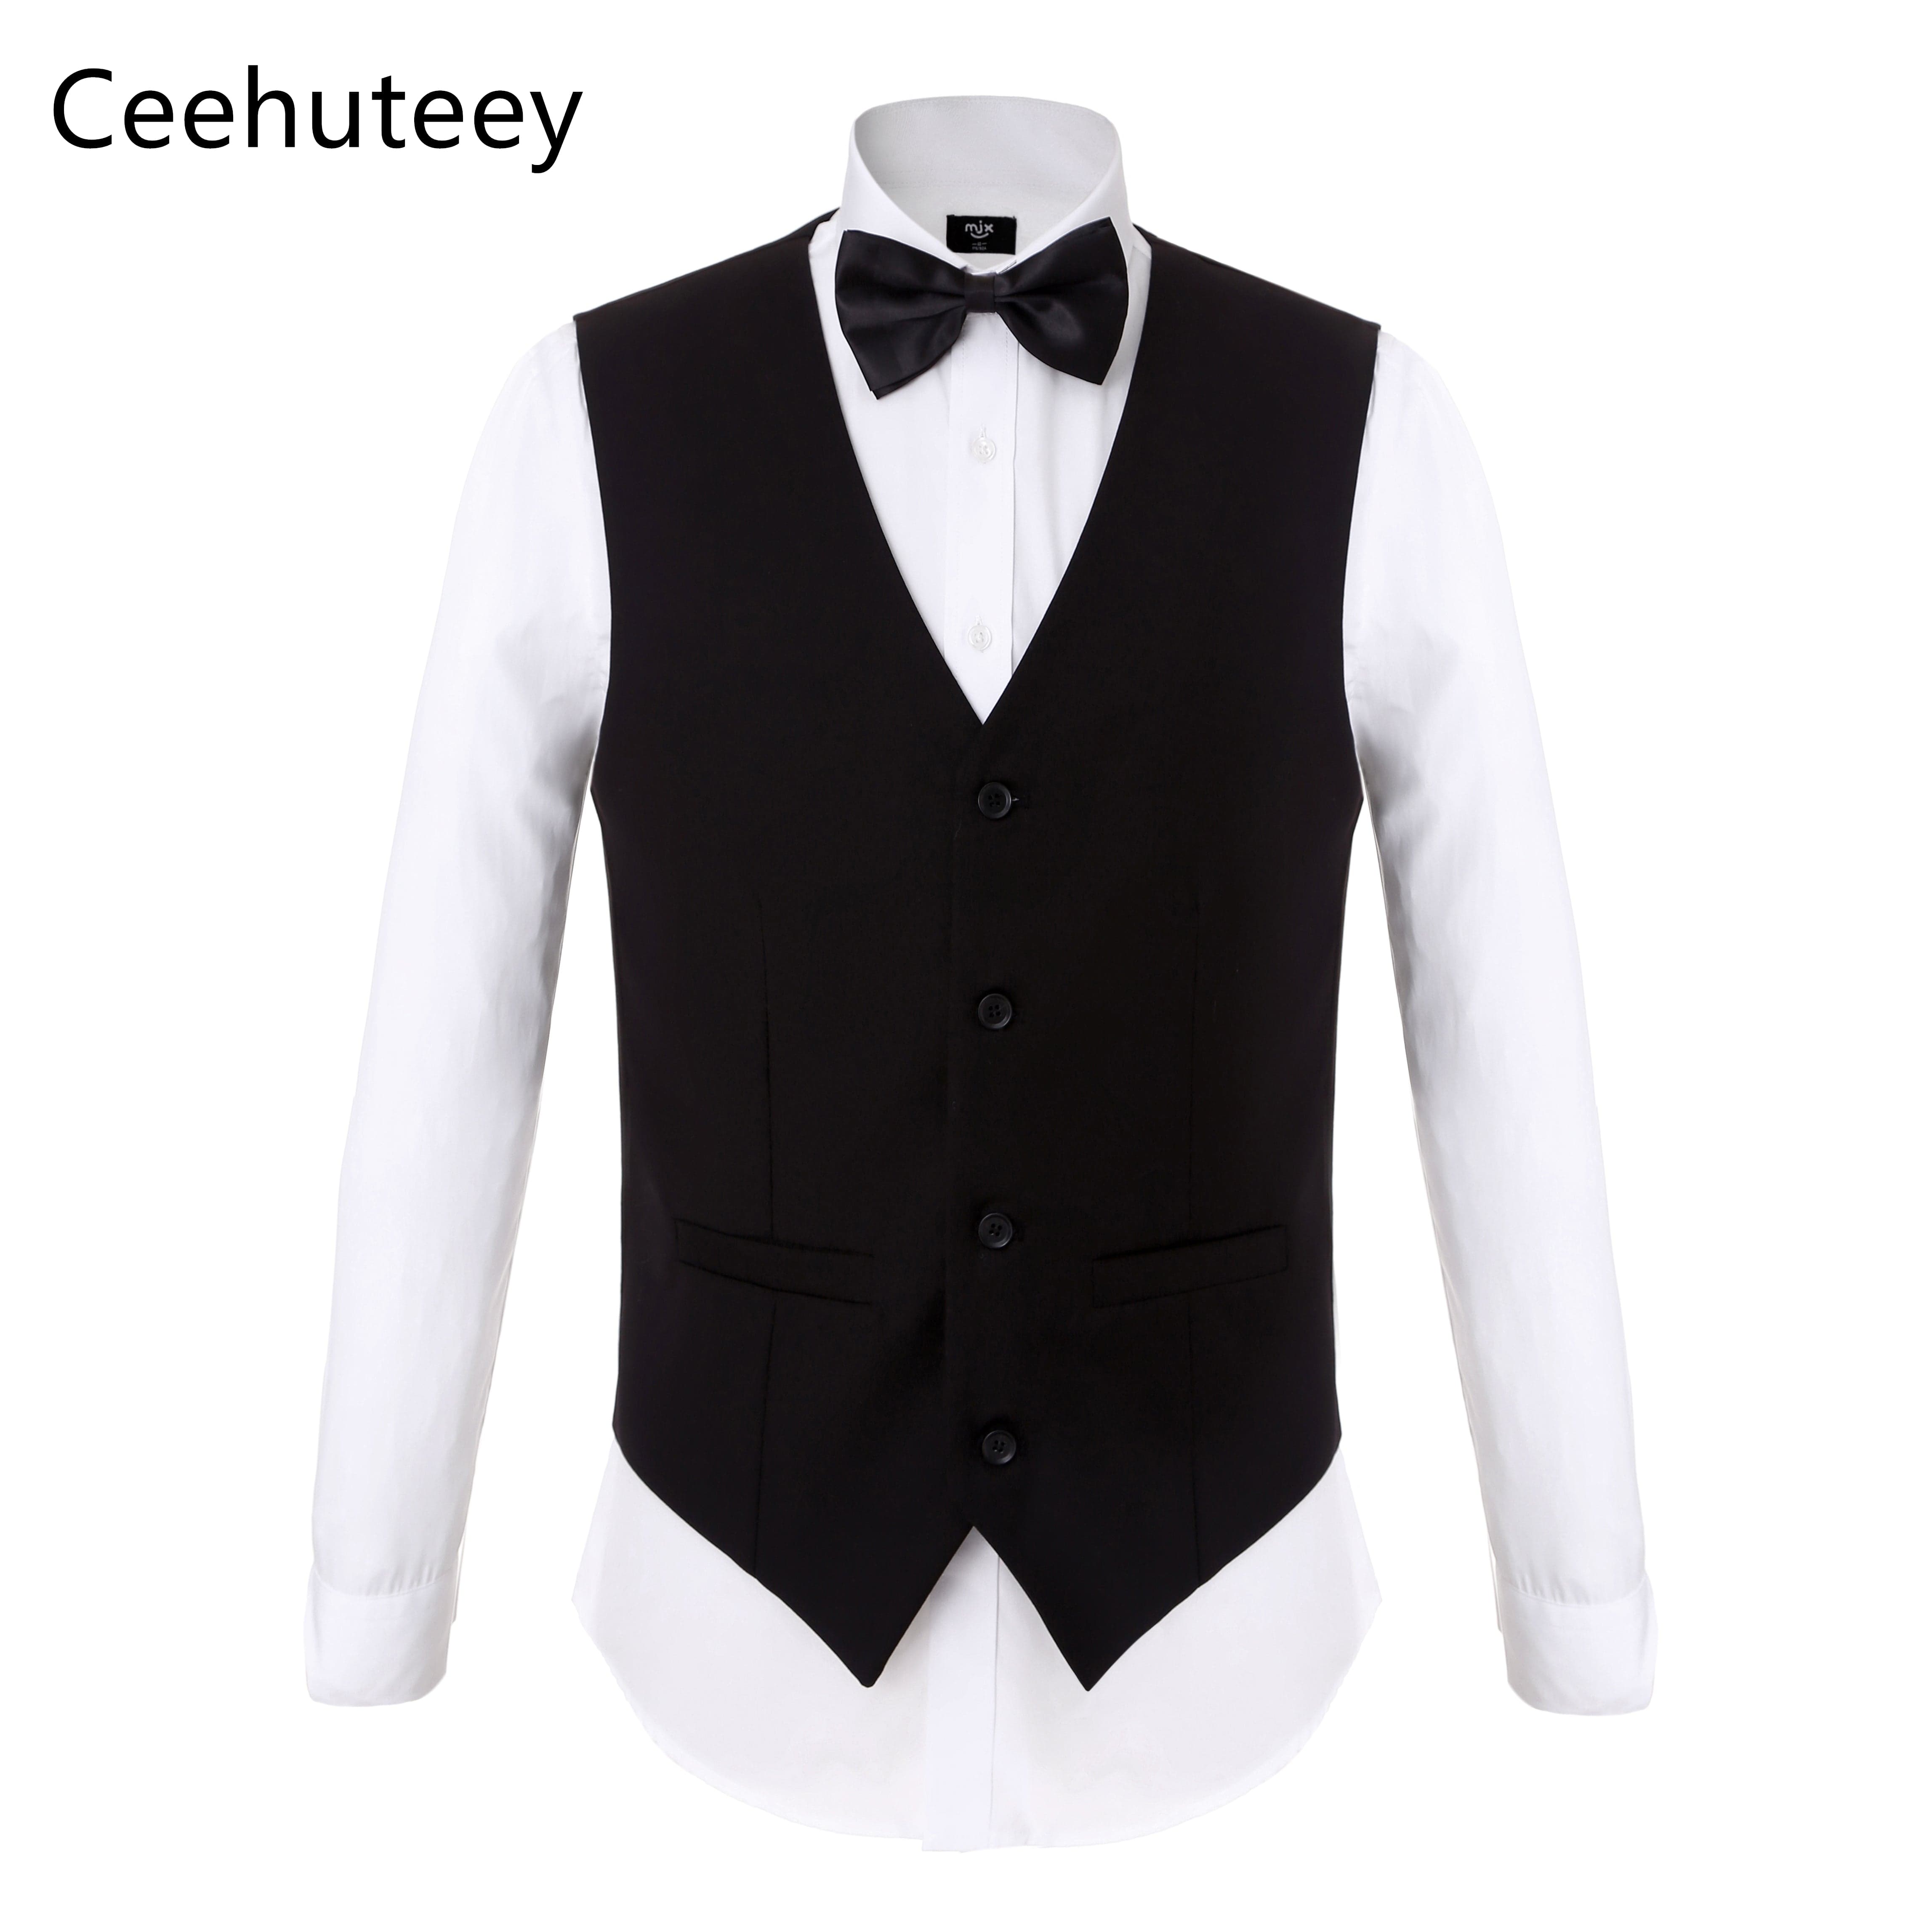 ceehuteey Men's Houndstooth Formal Notch Lapel  for wedding party Tuxedos (Blazer + Vest +Pant)